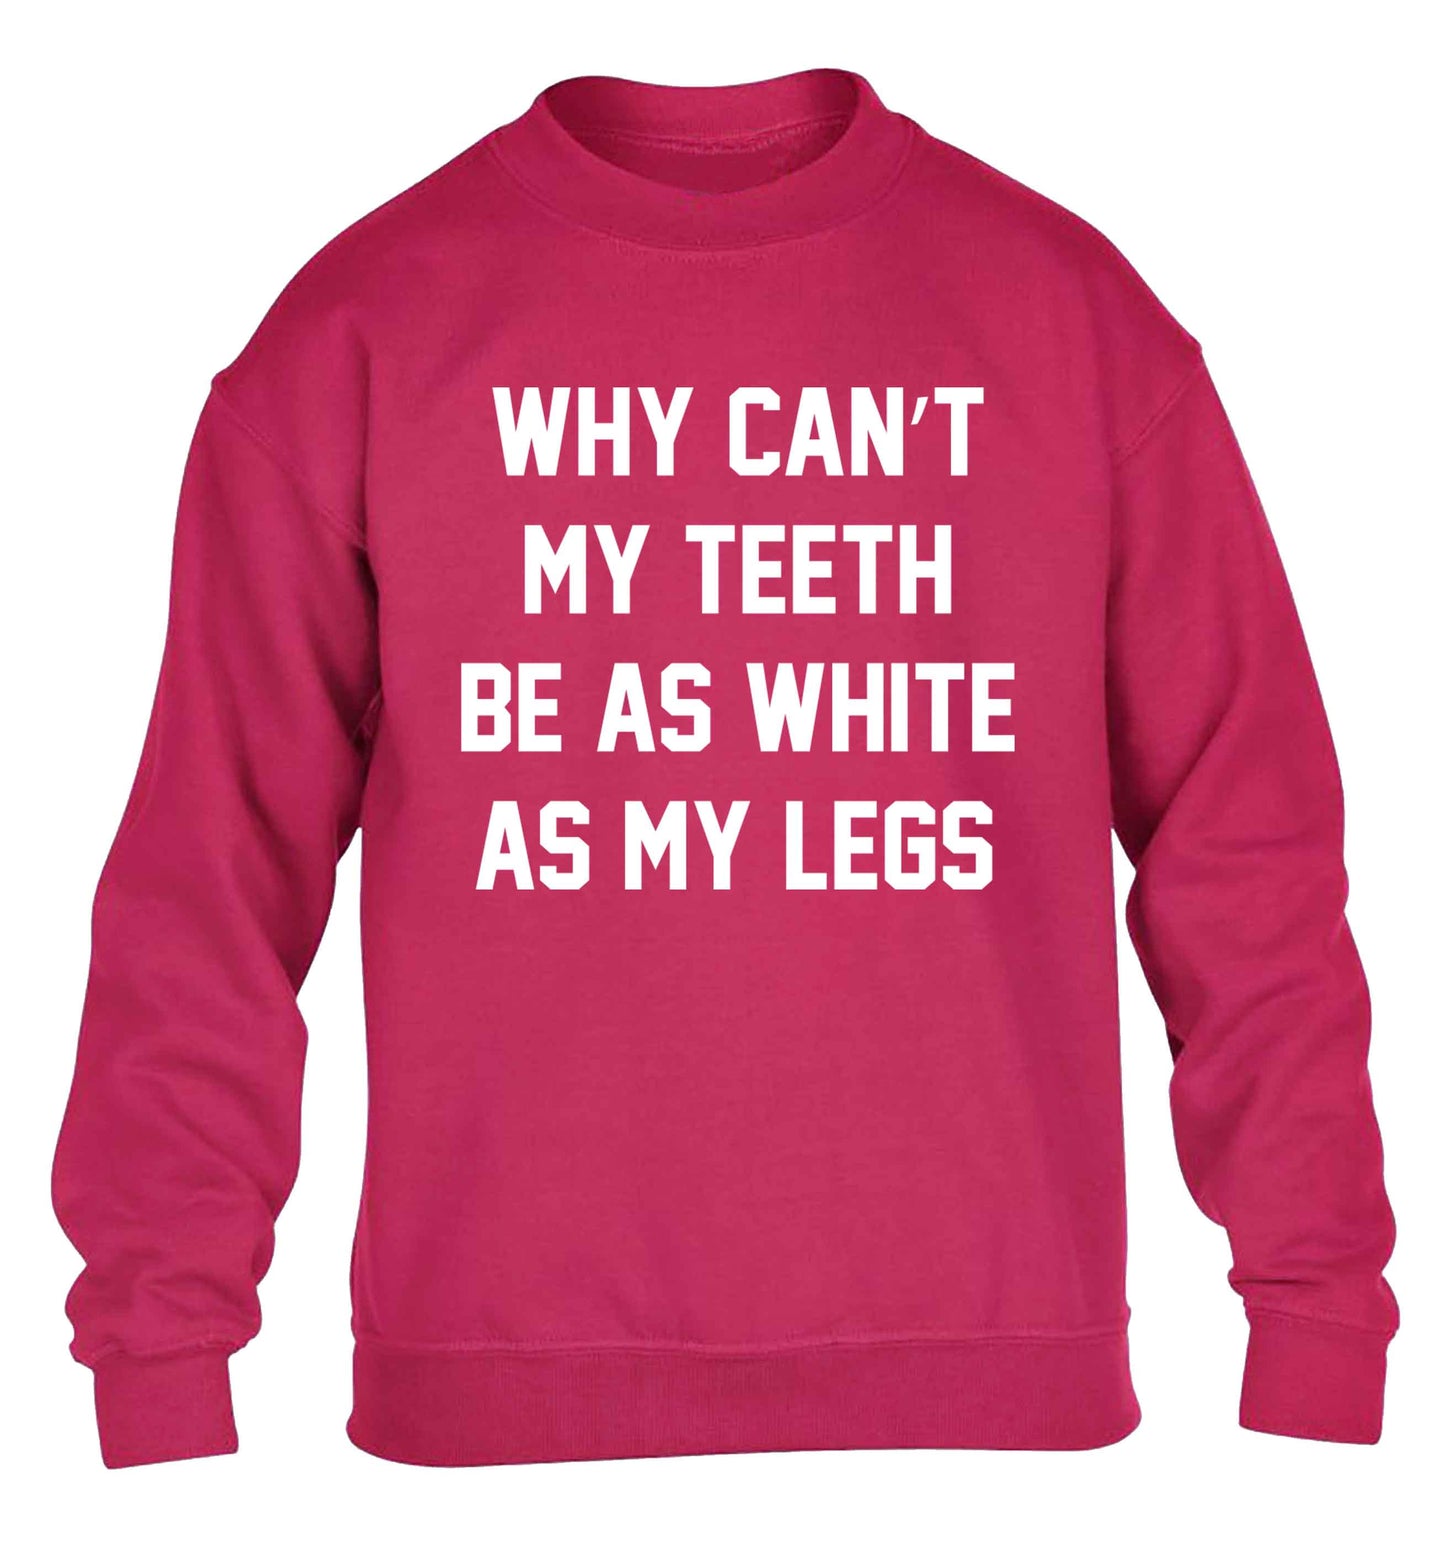 Why can't my teeth be as white as my legs children's pink sweater 12-13 Years